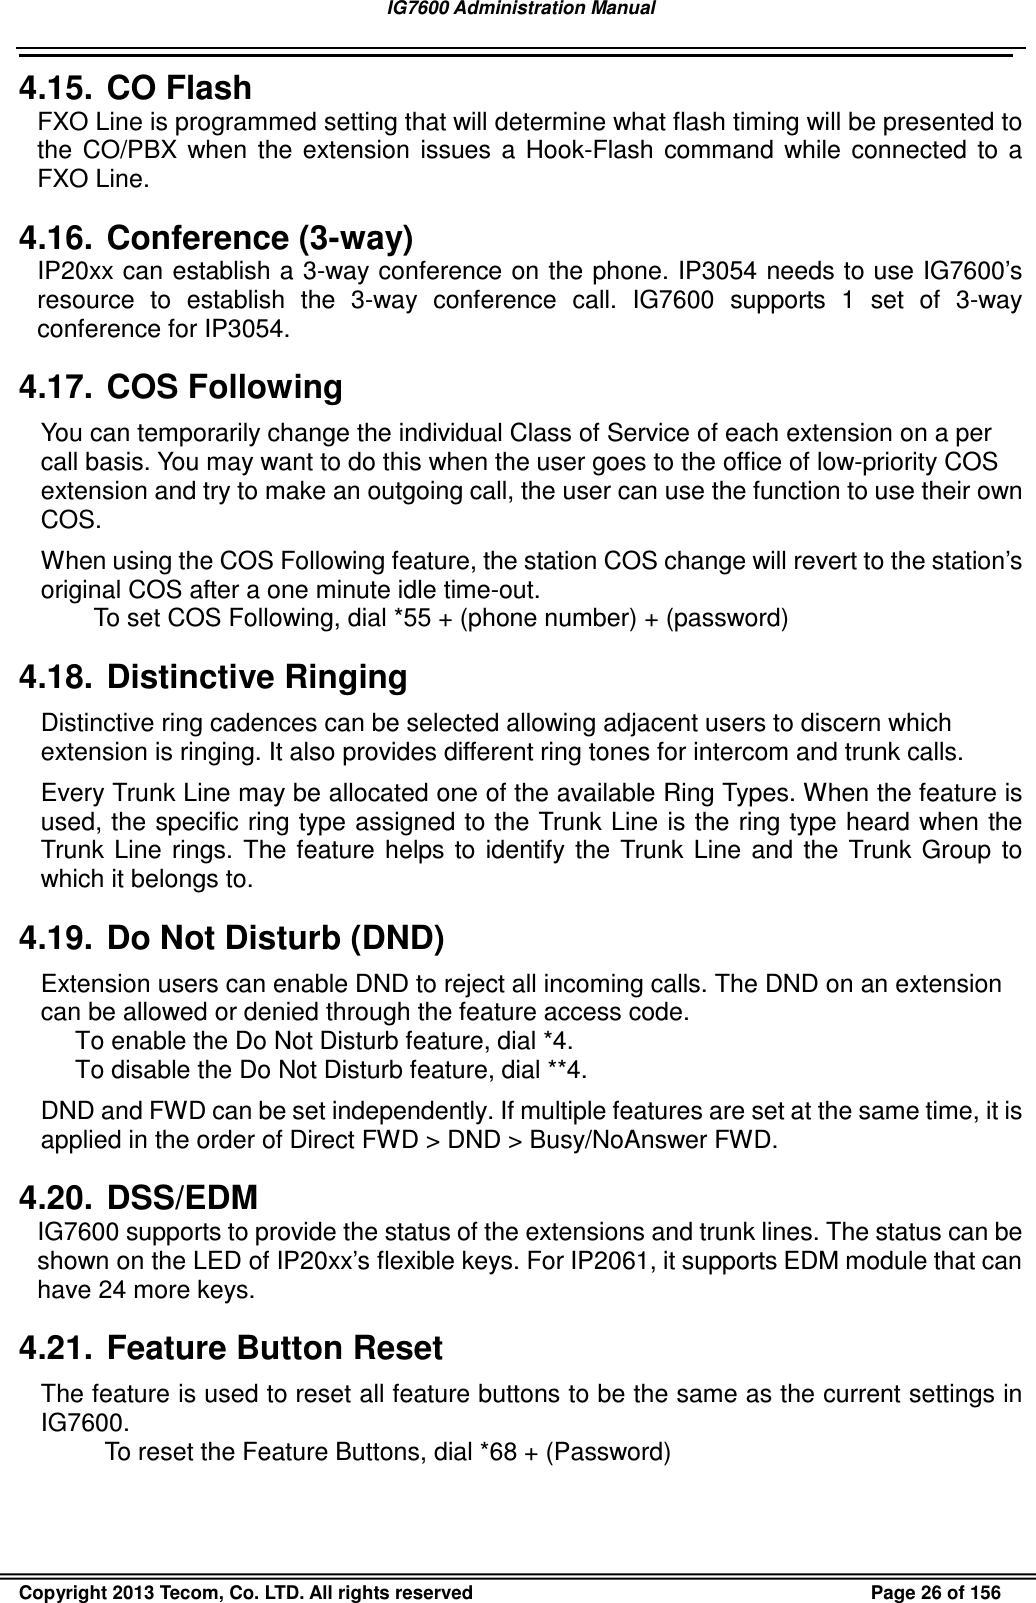 IG7600 Administration Manual                                                                                             Copyright 2013 Tecom, Co. LTD. All rights reserved  Page 26 of 156 4.15.  CO Flash FXO Line is programmed setting that will determine what flash timing will be presented to the  CO/PBX  when  the  extension  issues  a  Hook-Flash  command  while  connected  to  a FXO Line. 4.16.  Conference (3-way) IP20xx can establish a 3-way conference on the phone. IP3054 needs to use IG7600’s resource  to  establish  the  3-way  conference  call.  IG7600  supports  1  set  of  3-way conference for IP3054. 4.17.  COS Following You can temporarily change the individual Class of Service of each extension on a per call basis. You may want to do this when the user goes to the office of low-priority COS extension and try to make an outgoing call, the user can use the function to use their own COS. When using the COS Following feature, the station COS change will revert to the station’s original COS after a one minute idle time-out. To set COS Following, dial *55 + (phone number) + (password) 4.18.  Distinctive Ringing Distinctive ring cadences can be selected allowing adjacent users to discern which extension is ringing. It also provides different ring tones for intercom and trunk calls. Every Trunk Line may be allocated one of the available Ring Types. When the feature is used, the specific ring type assigned to the Trunk Line is the ring type heard when the Trunk  Line  rings.  The  feature  helps to  identify  the  Trunk  Line  and  the  Trunk  Group  to which it belongs to. 4.19.  Do Not Disturb (DND) Extension users can enable DND to reject all incoming calls. The DND on an extension can be allowed or denied through the feature access code. To enable the Do Not Disturb feature, dial *4. To disable the Do Not Disturb feature, dial **4. DND and FWD can be set independently. If multiple features are set at the same time, it is applied in the order of Direct FWD &gt; DND &gt; Busy/NoAnswer FWD. 4.20.  DSS/EDM IG7600 supports to provide the status of the extensions and trunk lines. The status can be shown on the LED of IP20xx’s flexible keys. For IP2061, it supports EDM module that can have 24 more keys. 4.21.  Feature Button Reset The feature is used to reset all feature buttons to be the same as the current settings in IG7600. To reset the Feature Buttons, dial *68 + (Password) 